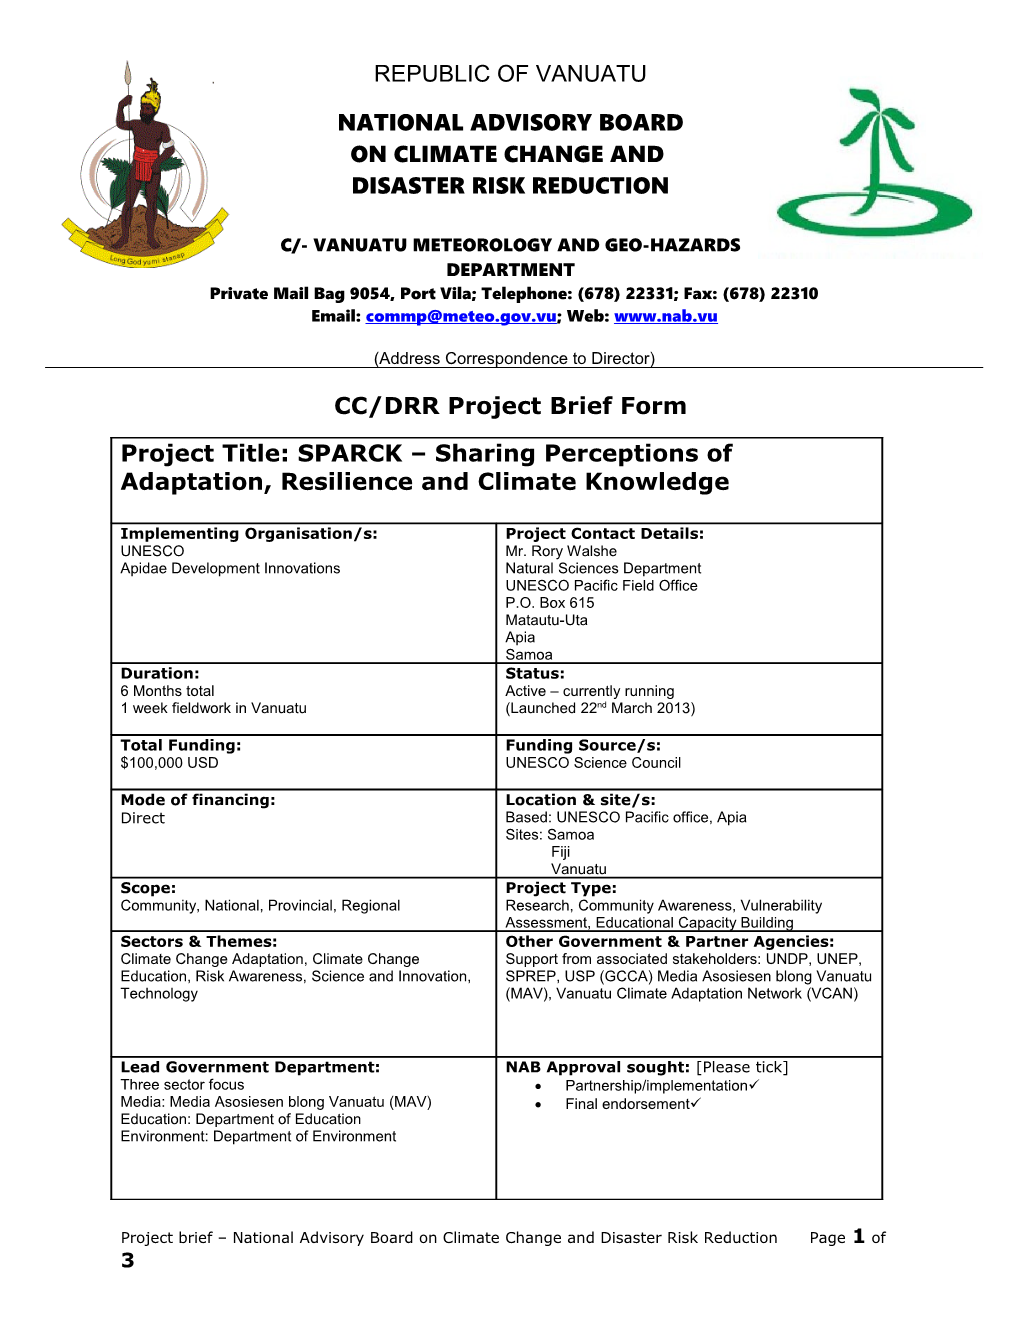 CC/DRR Project Brief Form